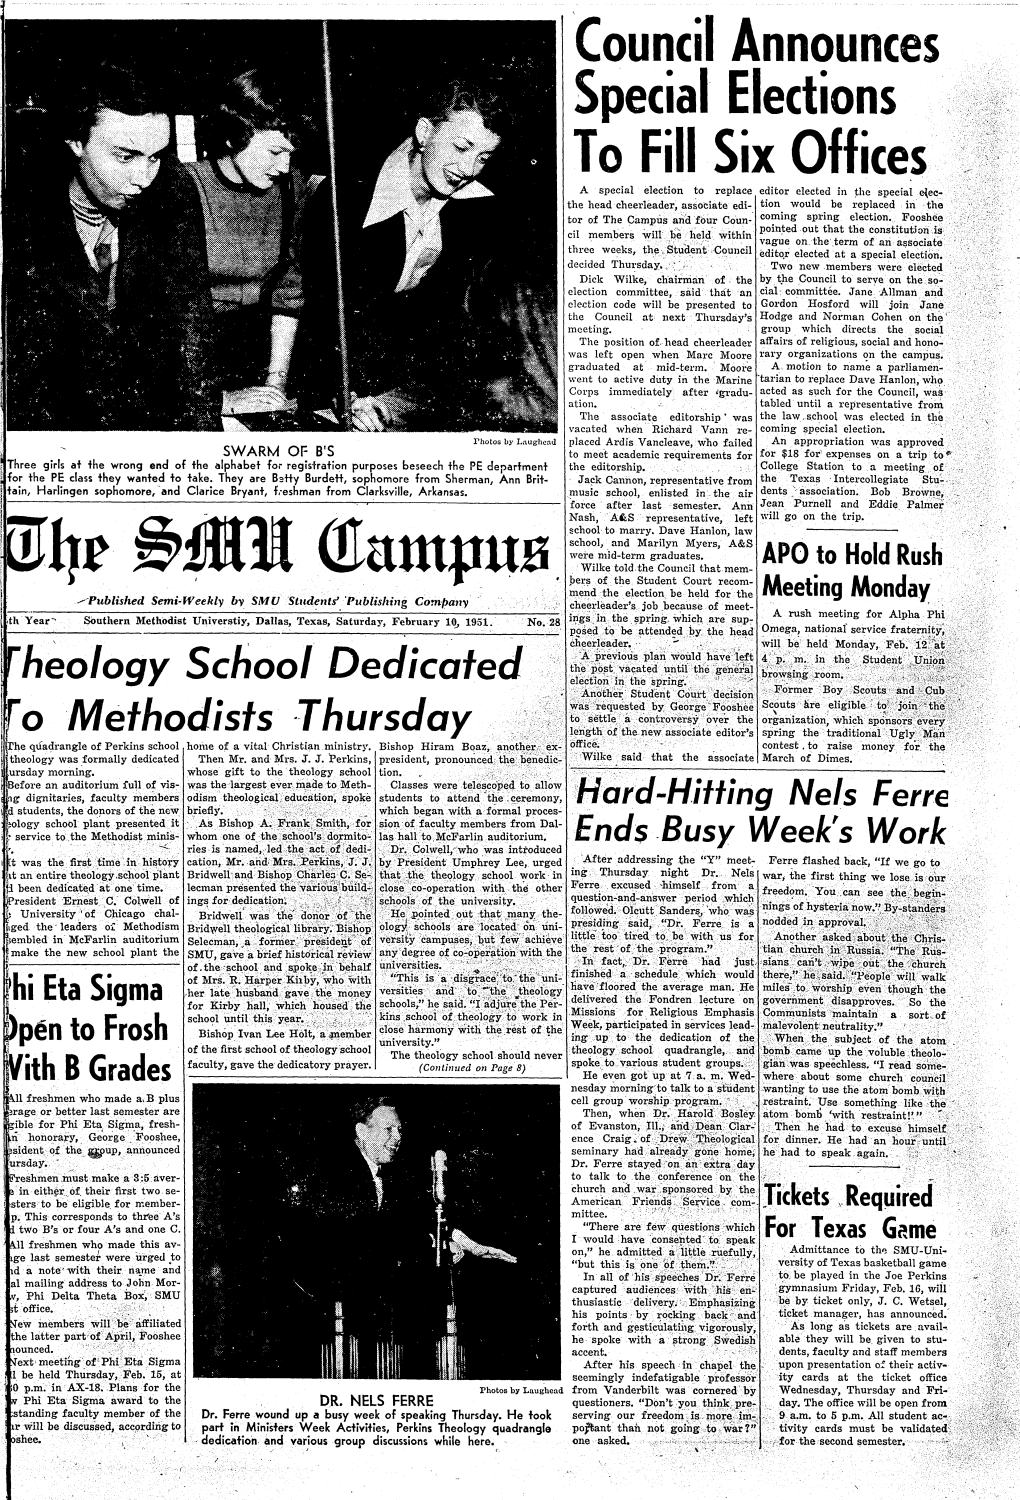 The SMU Campus, Volume 36, Number 28, February 10, 1951